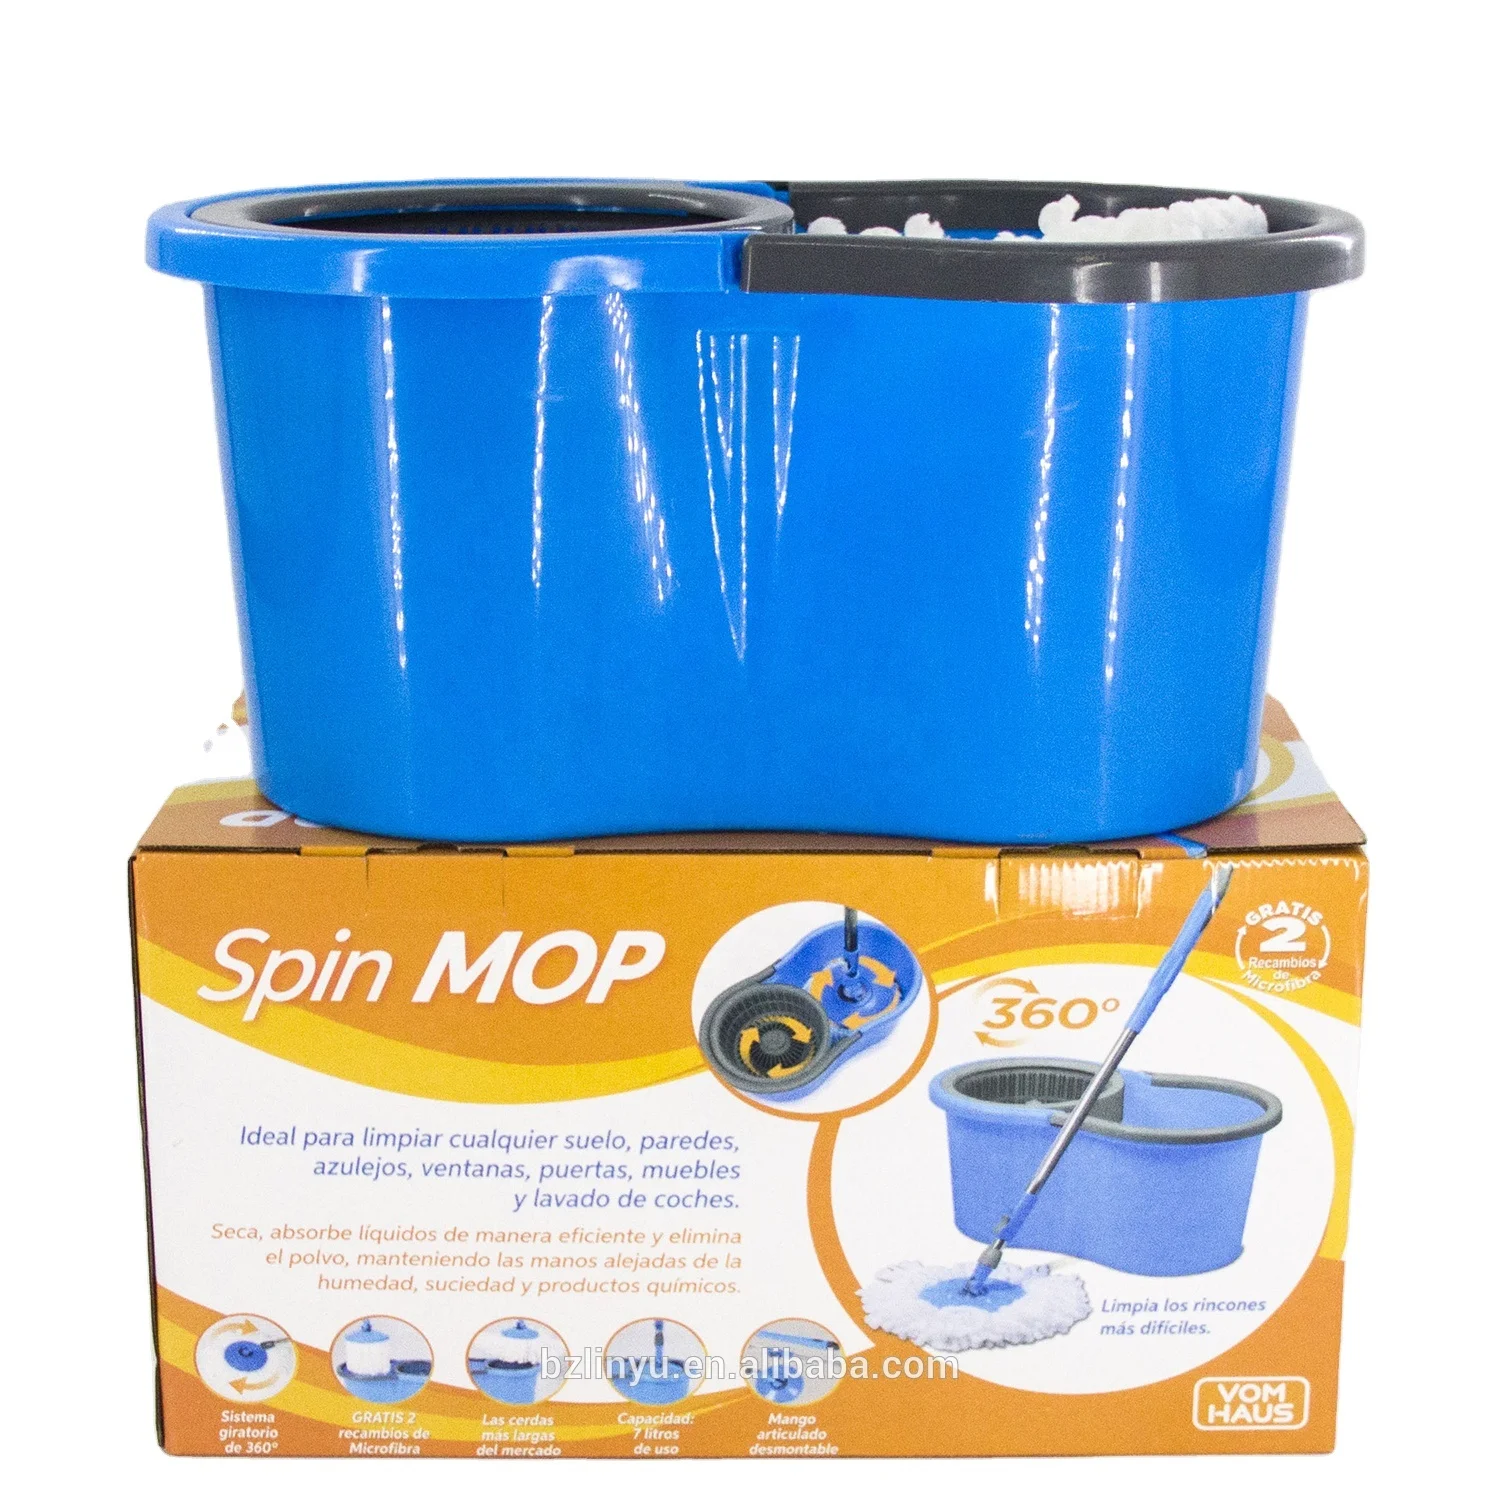 

Best Selling Wholesale 360 Spin Magic Mops Basket with Factory Price Bucket Mop X5 Telescopic Metal Microfibre Fabric Steel <2kg